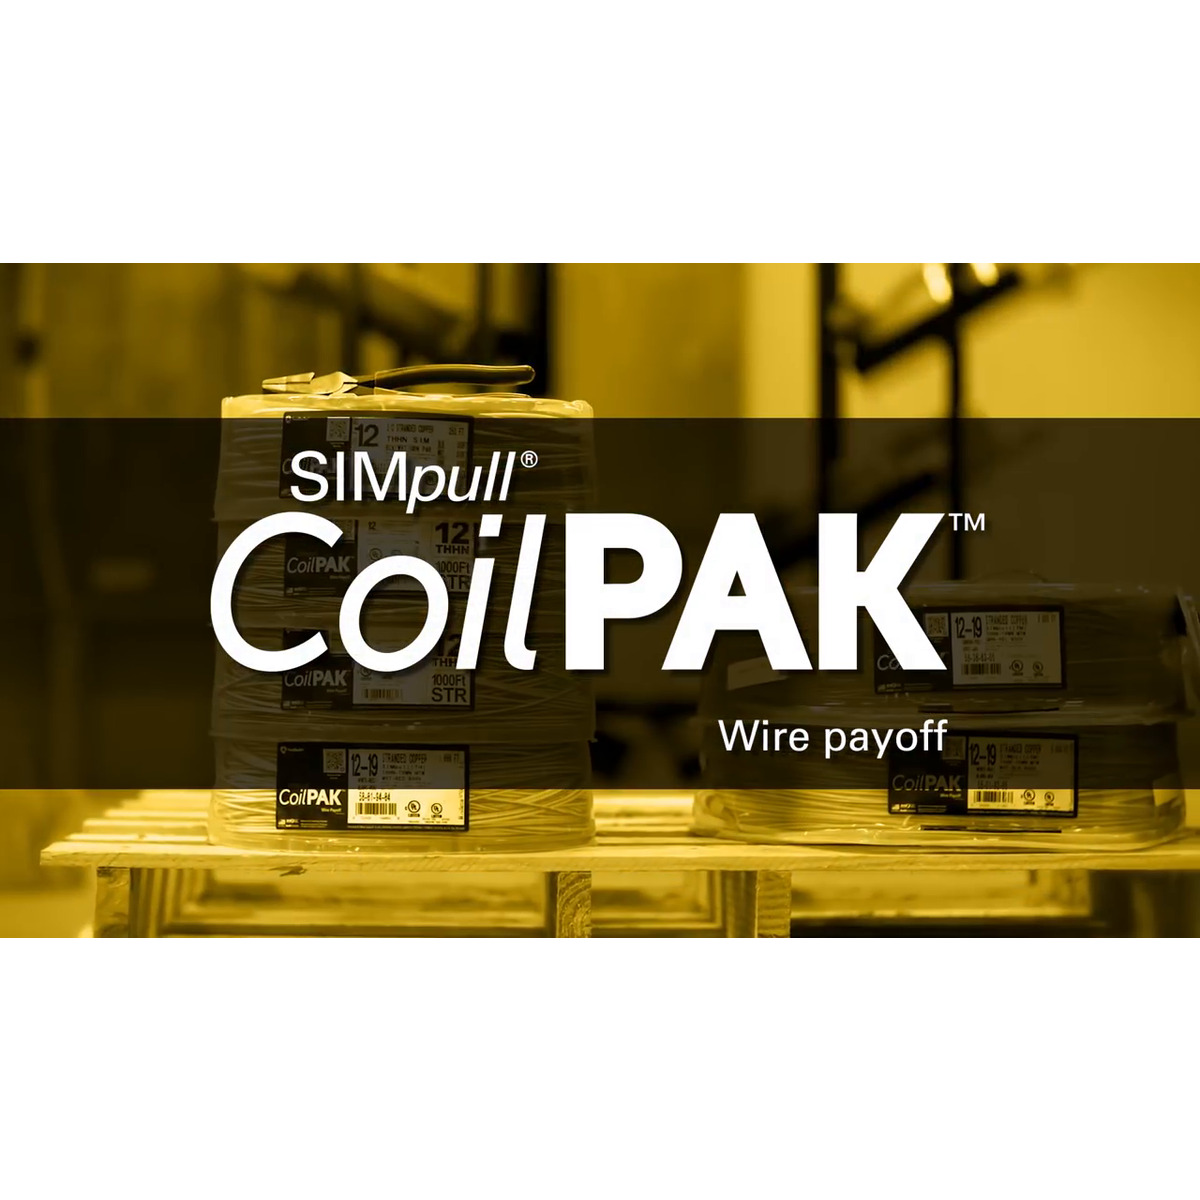 SIMpull CoilPAK™ Wire Payoff